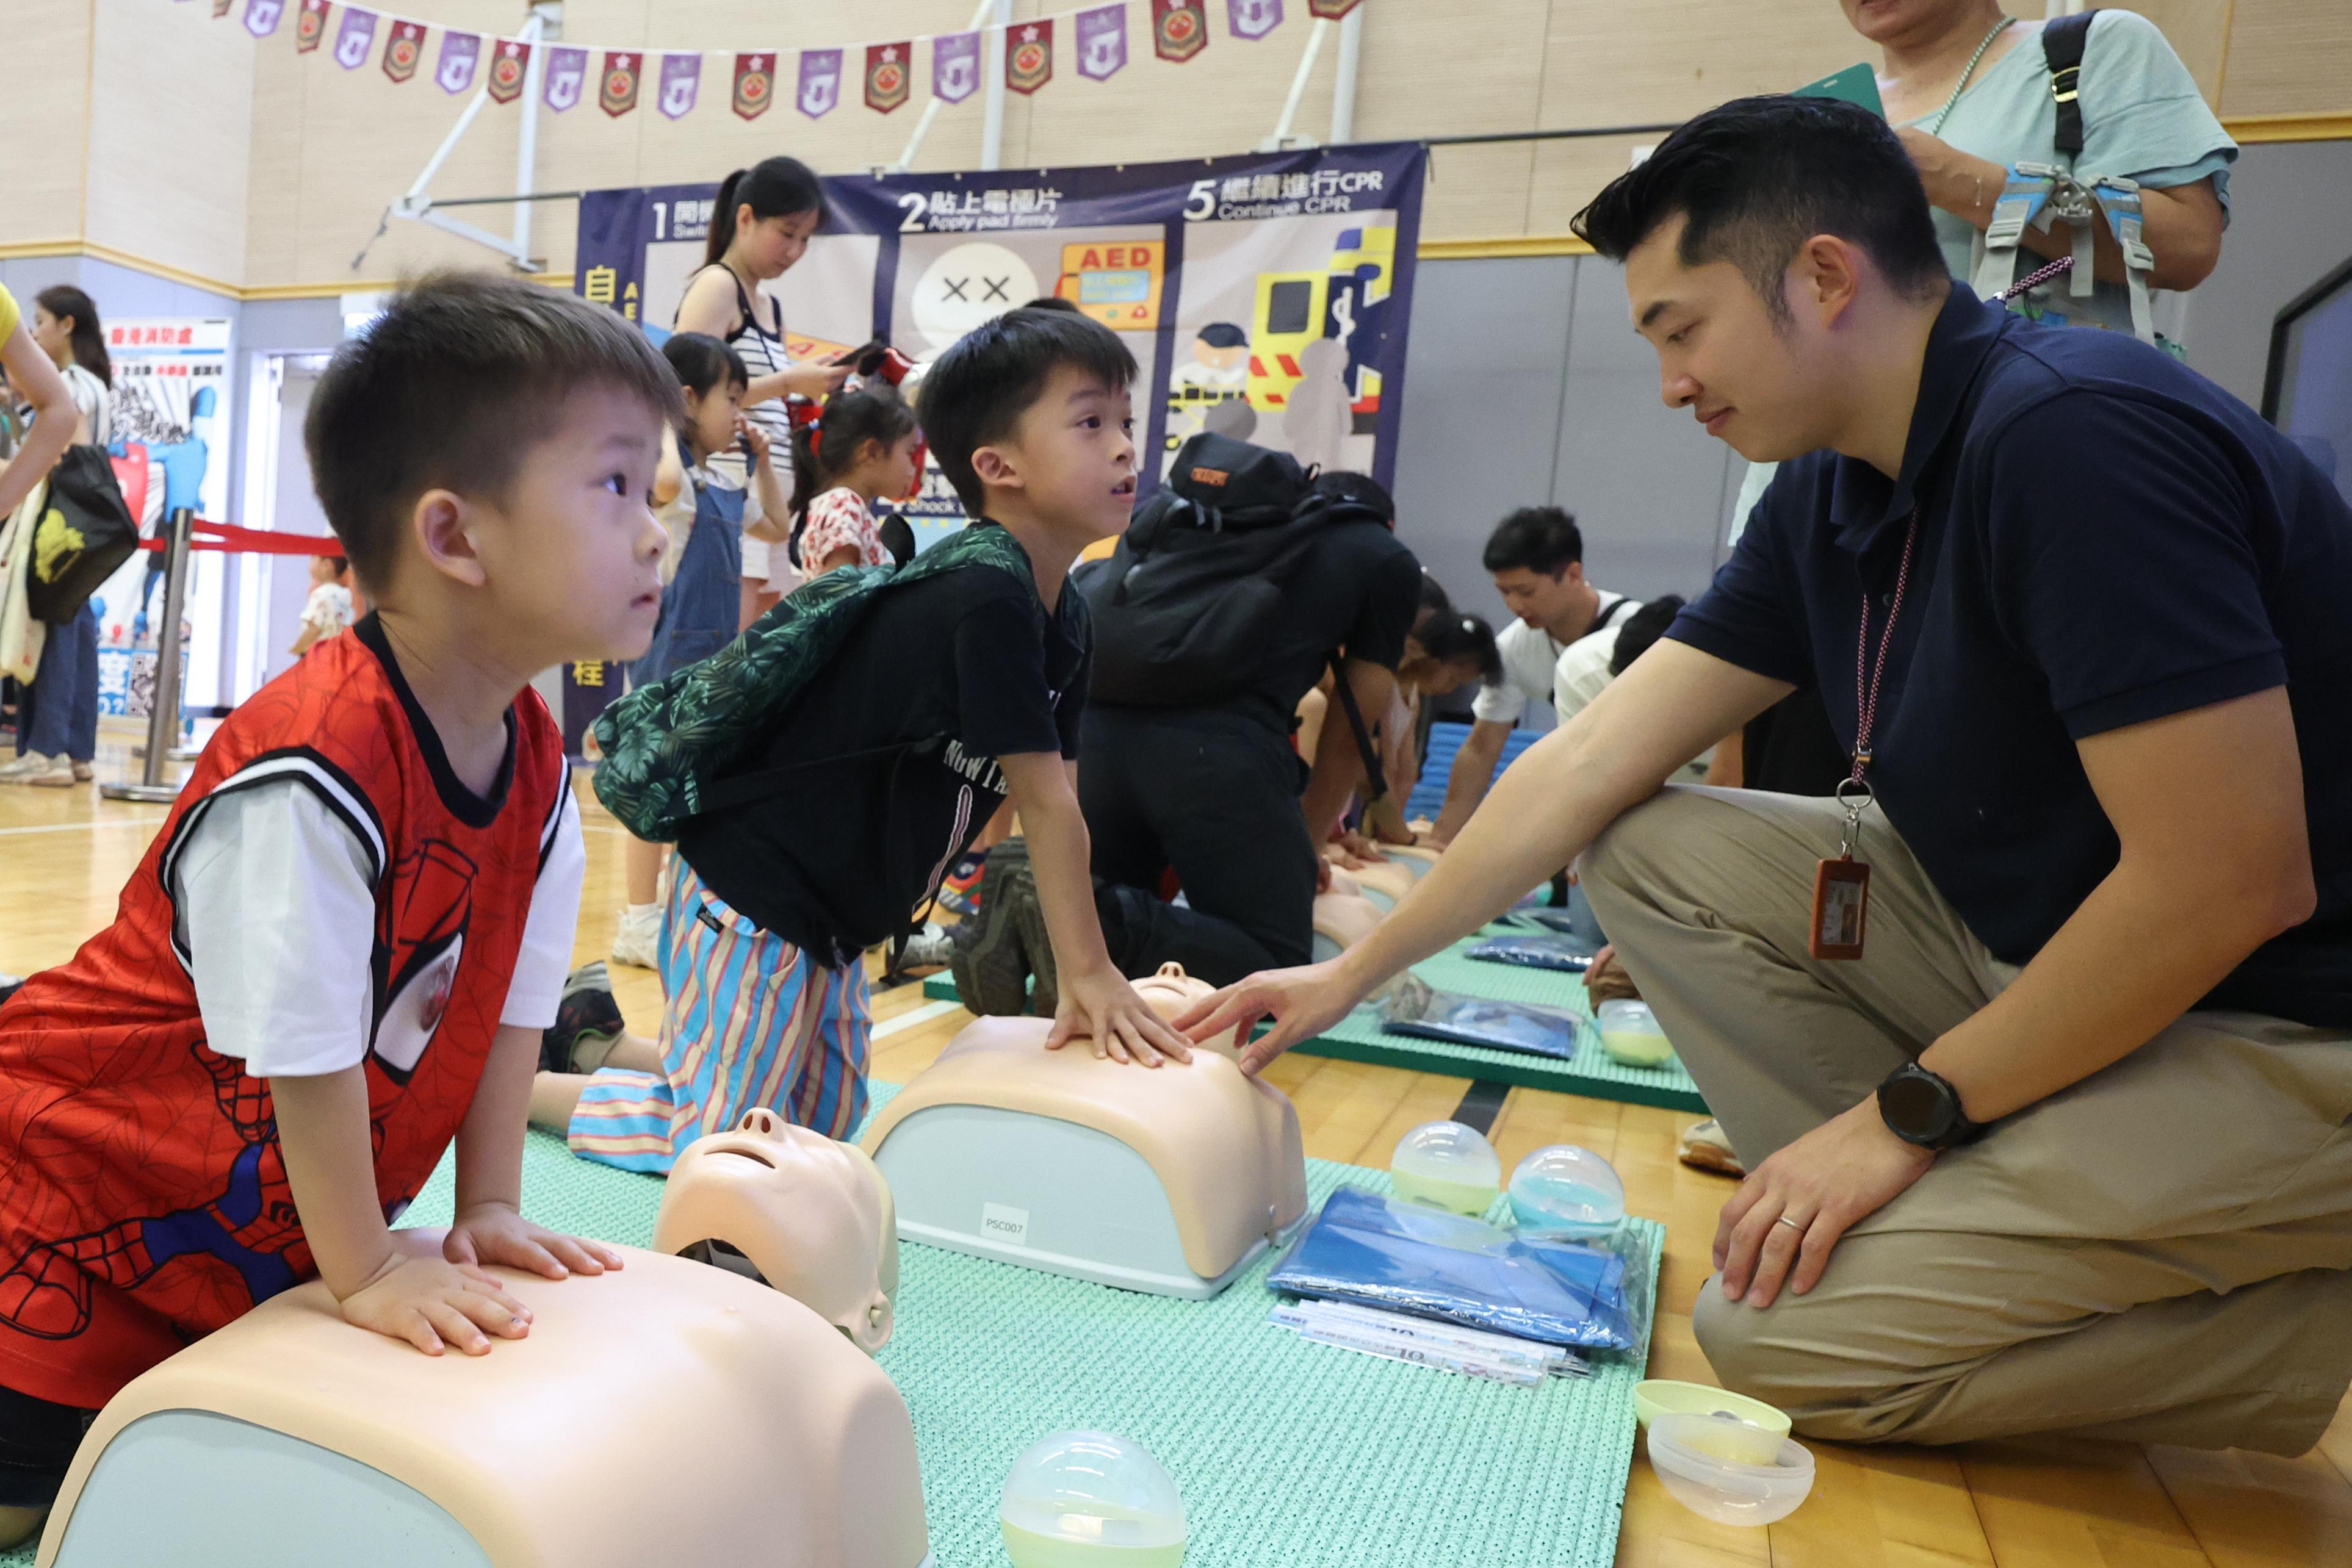 In response to and support of National Security Education Day, the Fire Services Department held an open day at the Fire and Ambulance Services Academy in Tseung Kwan O today (April 14). Photo shows visitors learning administration of cardiopulmonary resuscitation under the instruction of ambulance personnel.